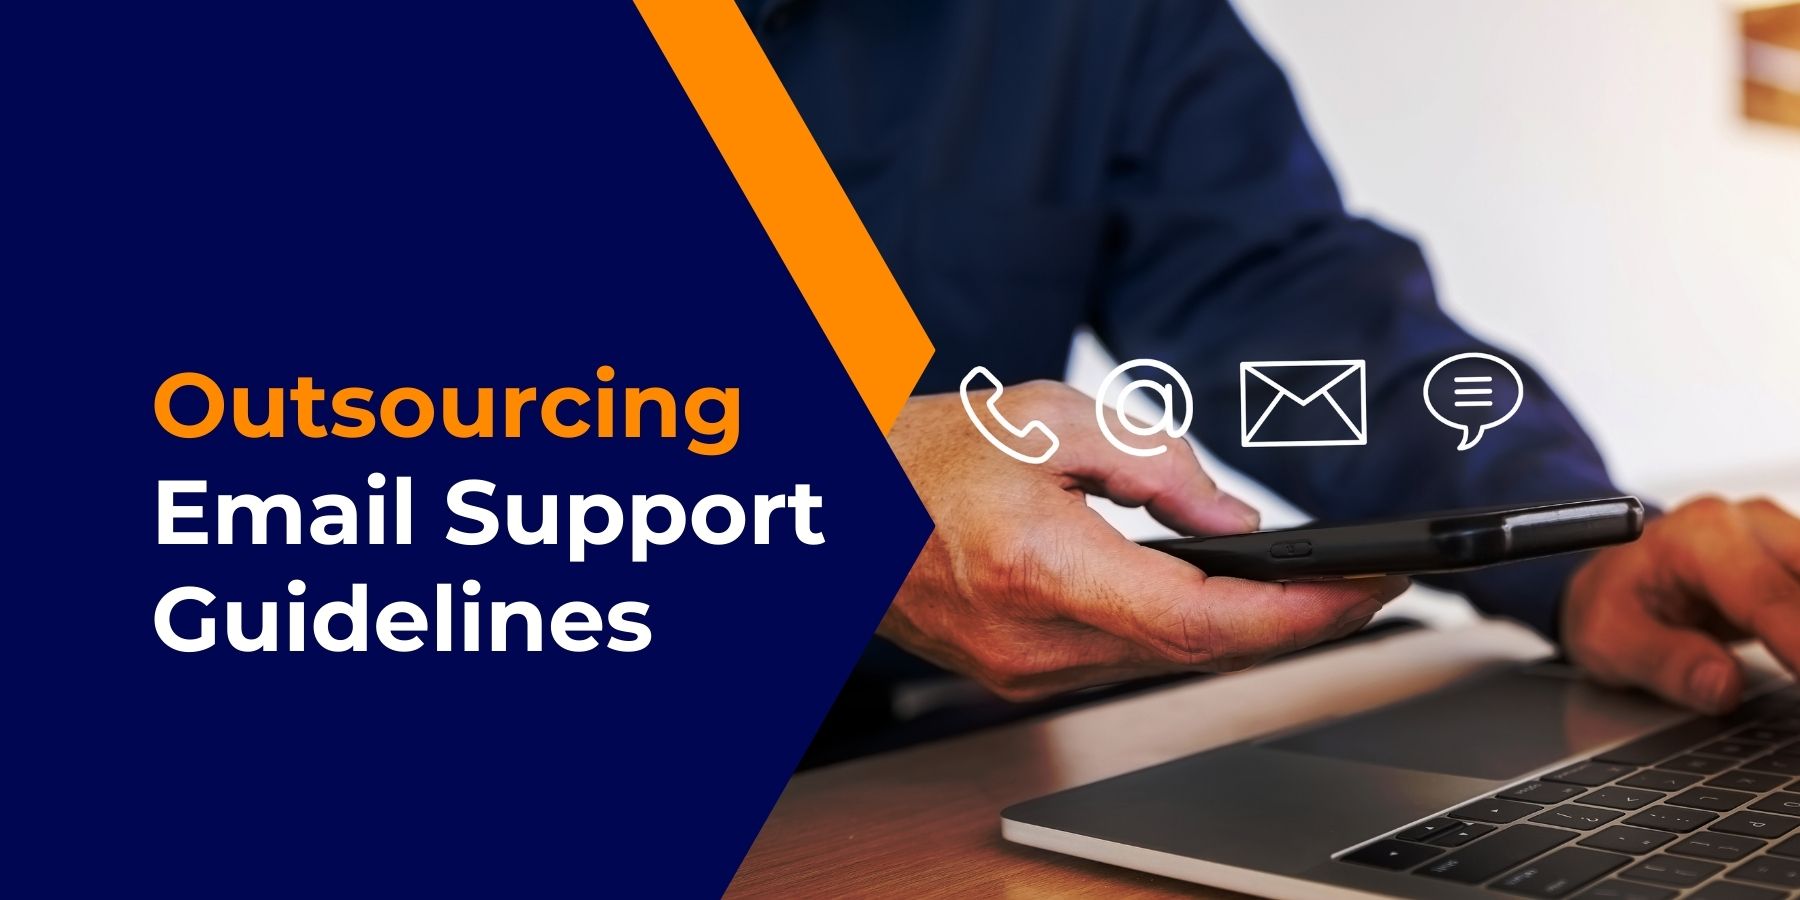 Outsourcing Email Support Guidelines